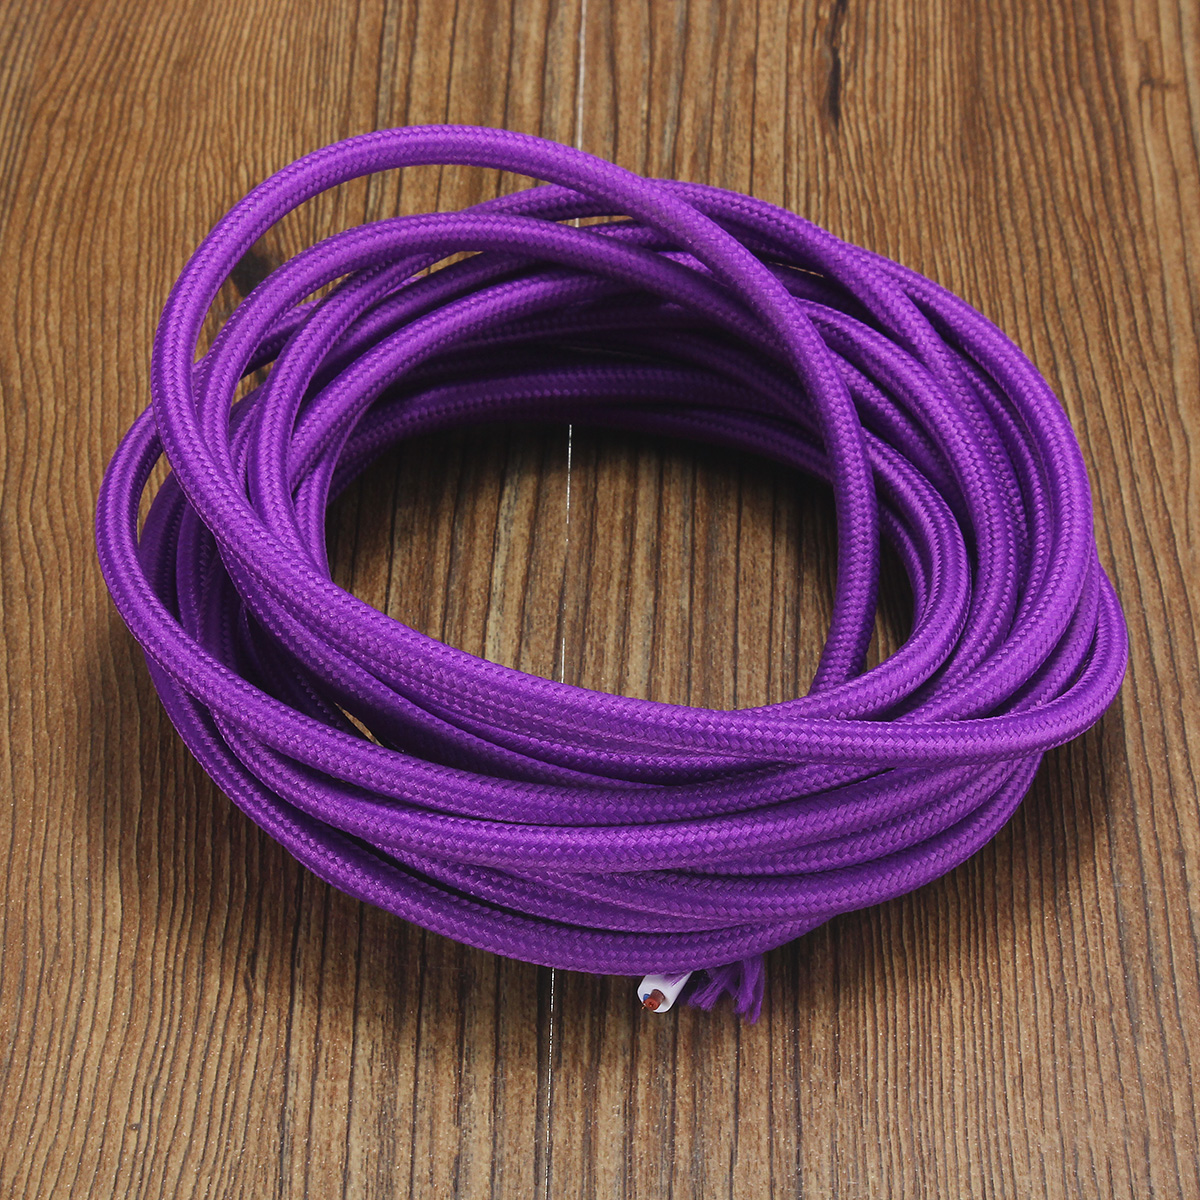 5M-2-Cord-Color-Vintage-Twist-Braided-Fabric-Light-Cable-Electric-Wire-1069142-3